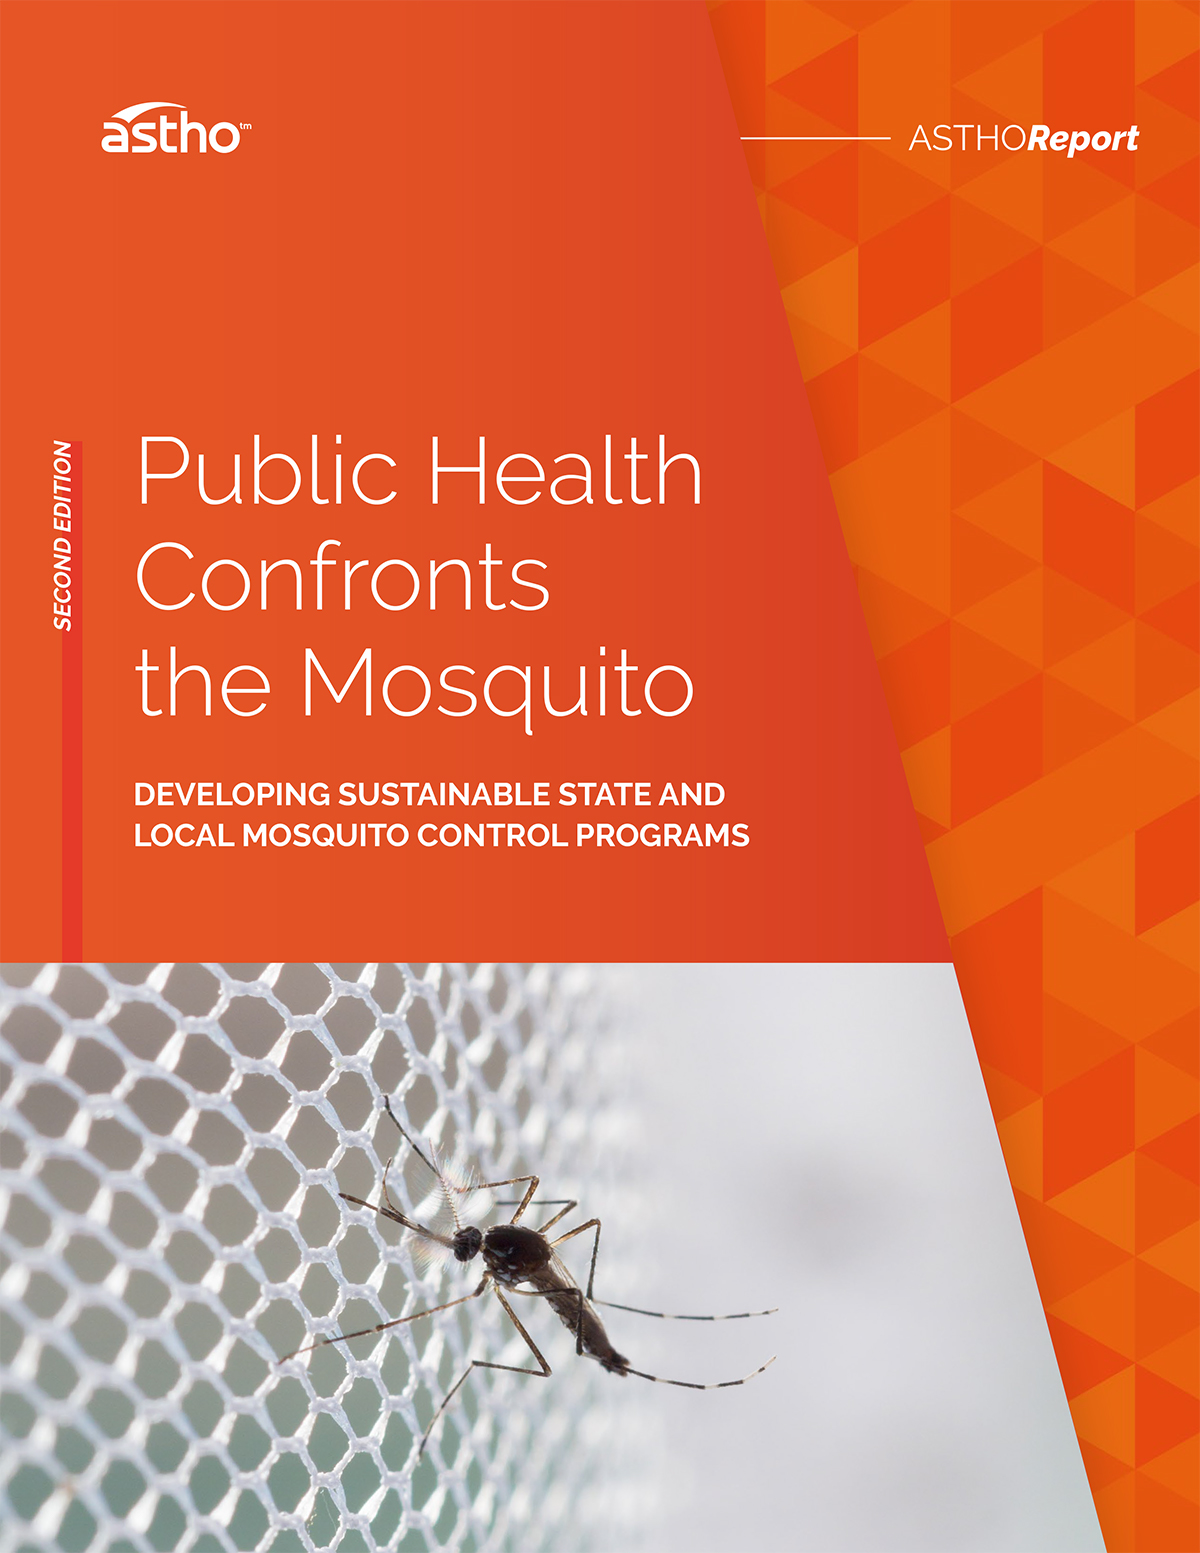 Public Health Confronts the Mosquito: Developing Sustainable State and Local Mosquito Control Programs (PDF)